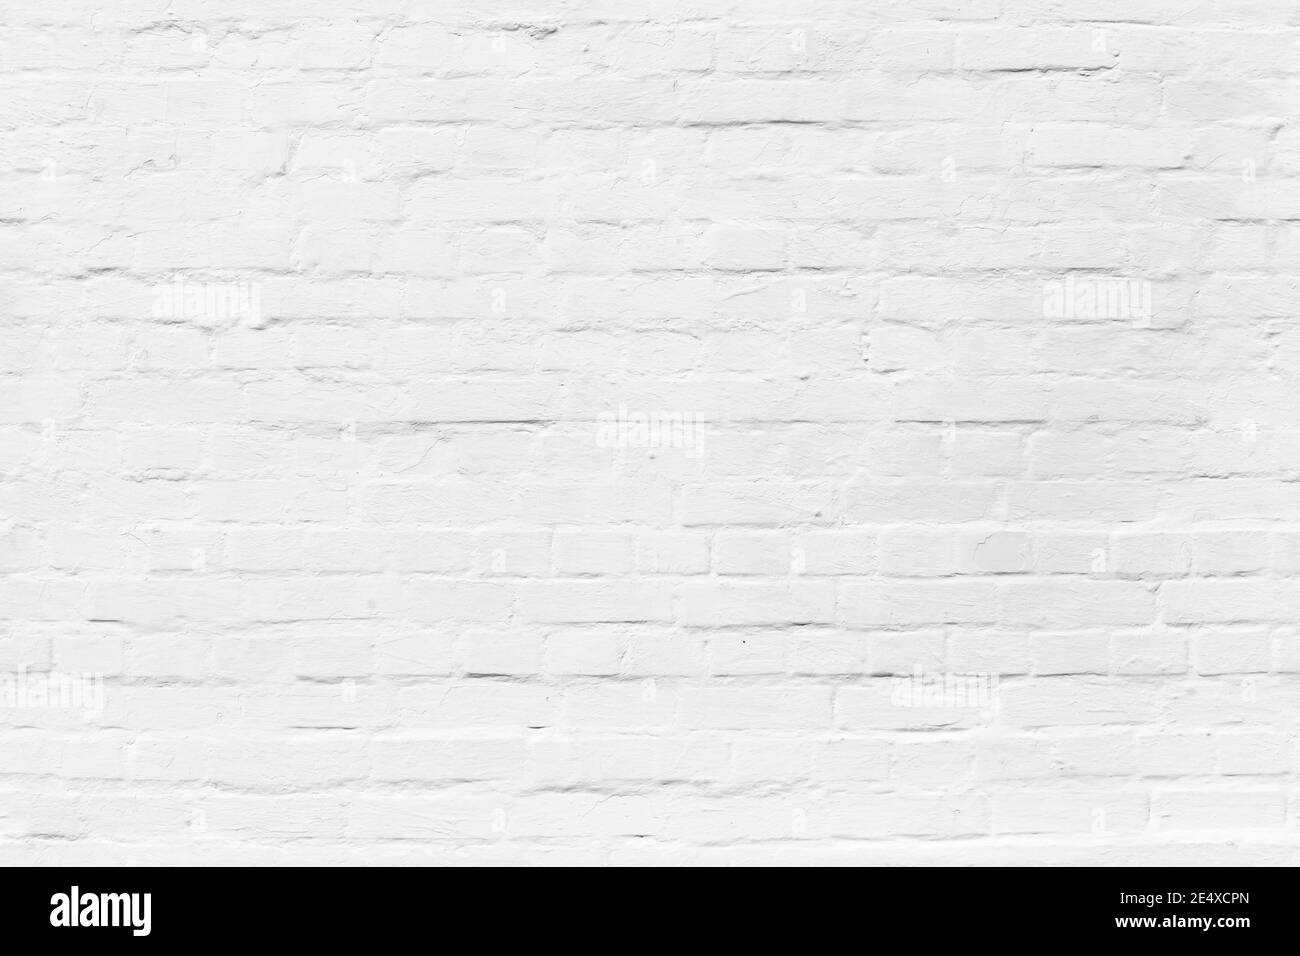 Brick wall with white plastering, seamless background photo texture Stock Photo